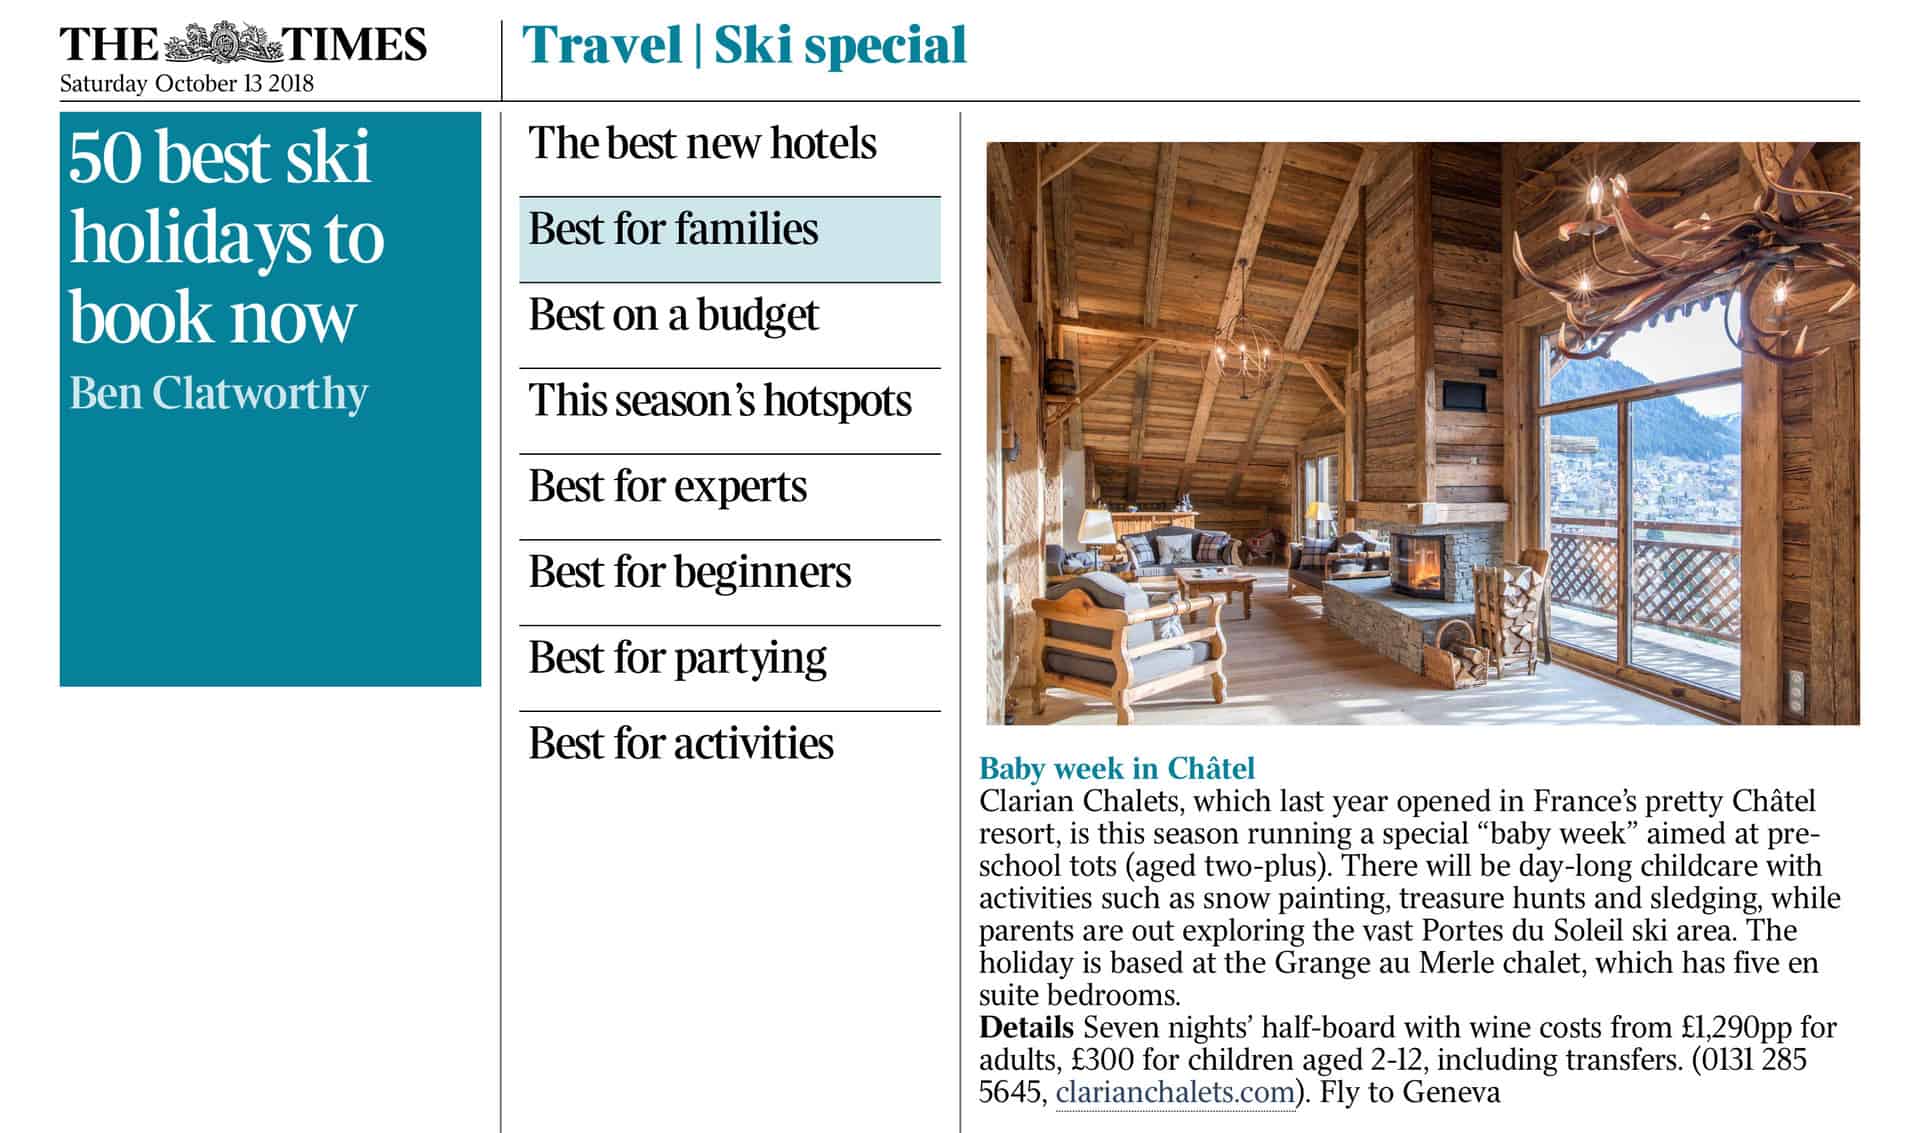 Article in The Times news paper-50 best ski holidays